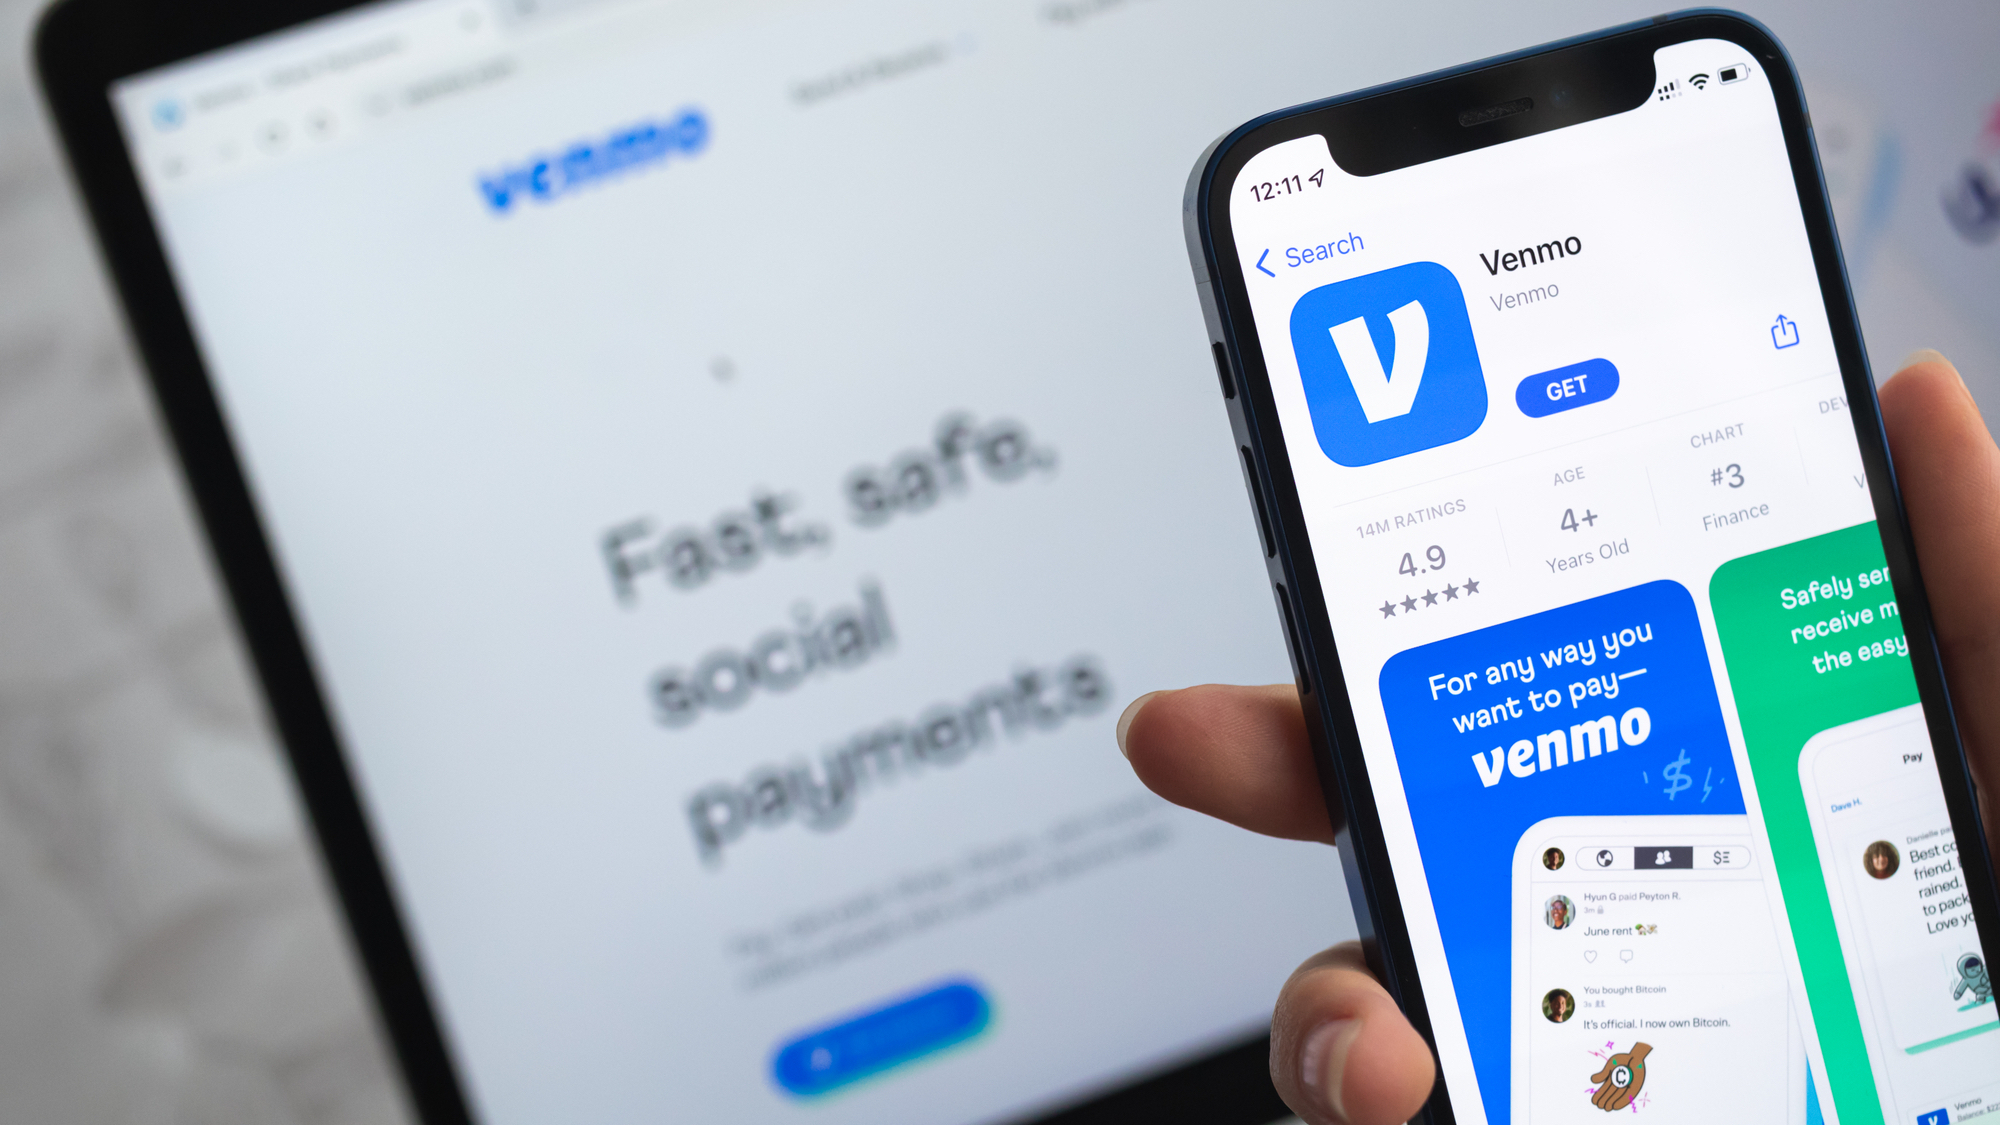 Amazon cuts Venmo payment option barely a year after enabling it